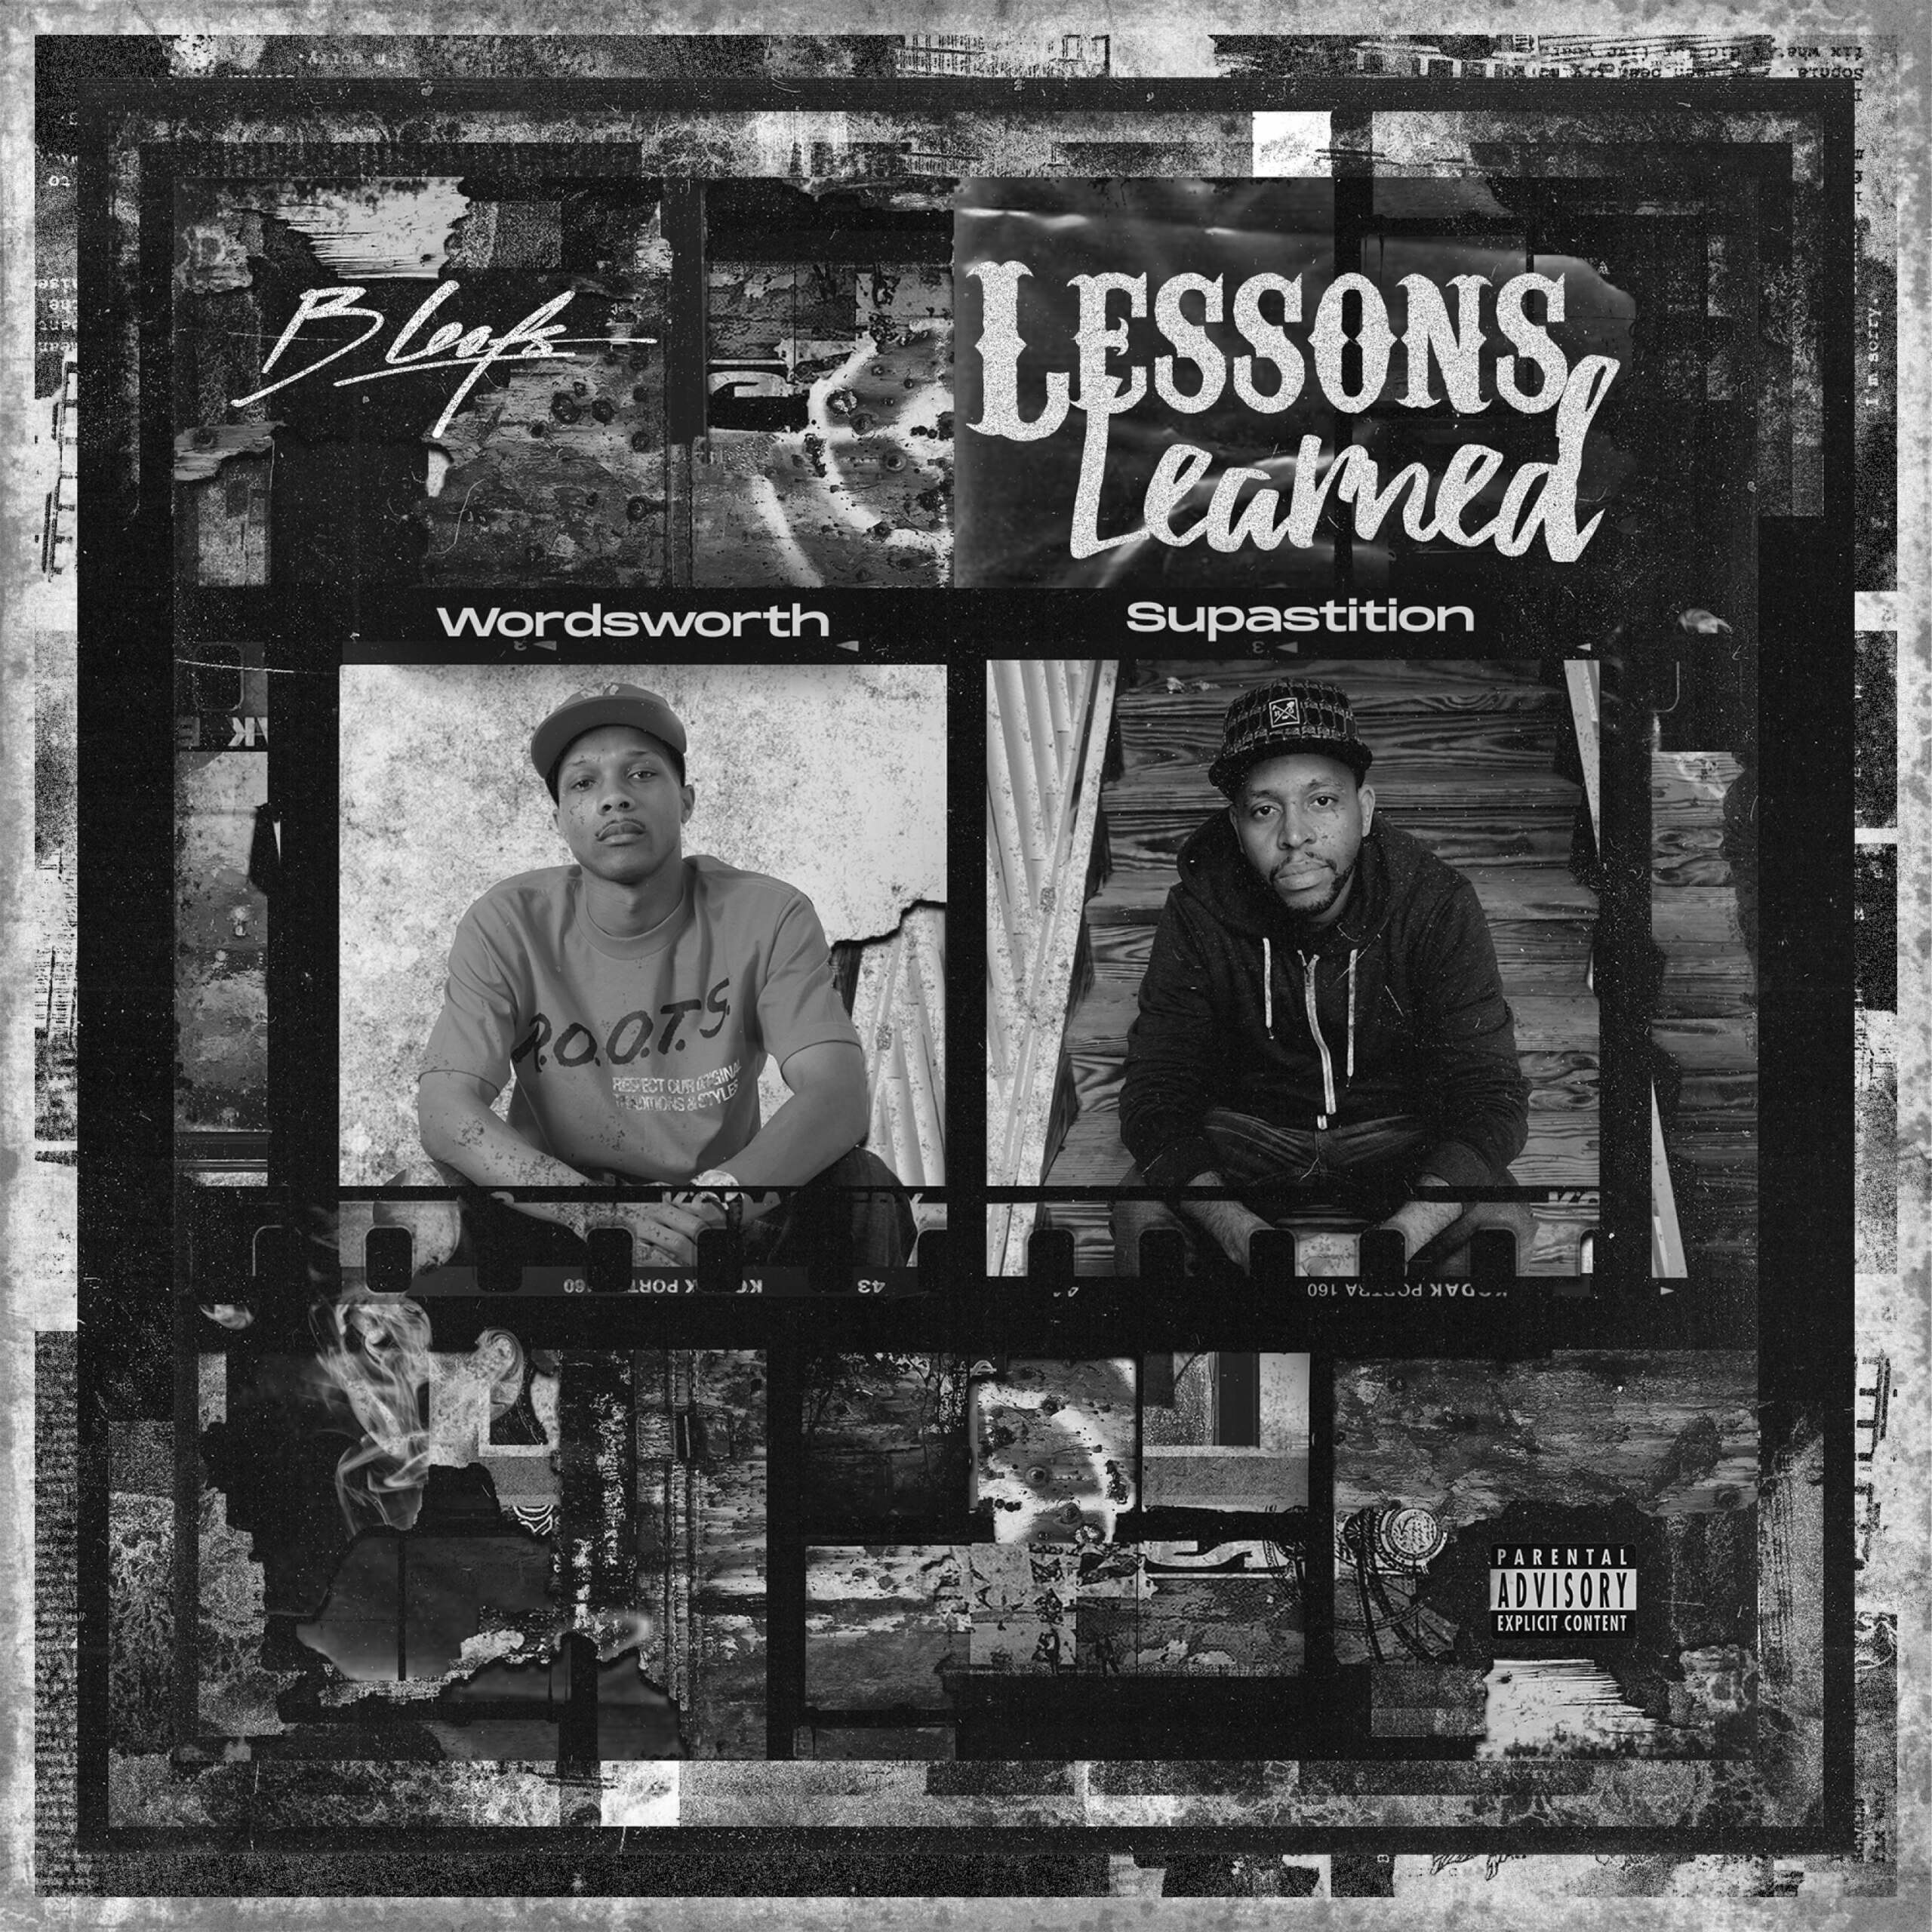 MP3: B Leafs feat. Supastition & Wordsworth - Lessons Learned